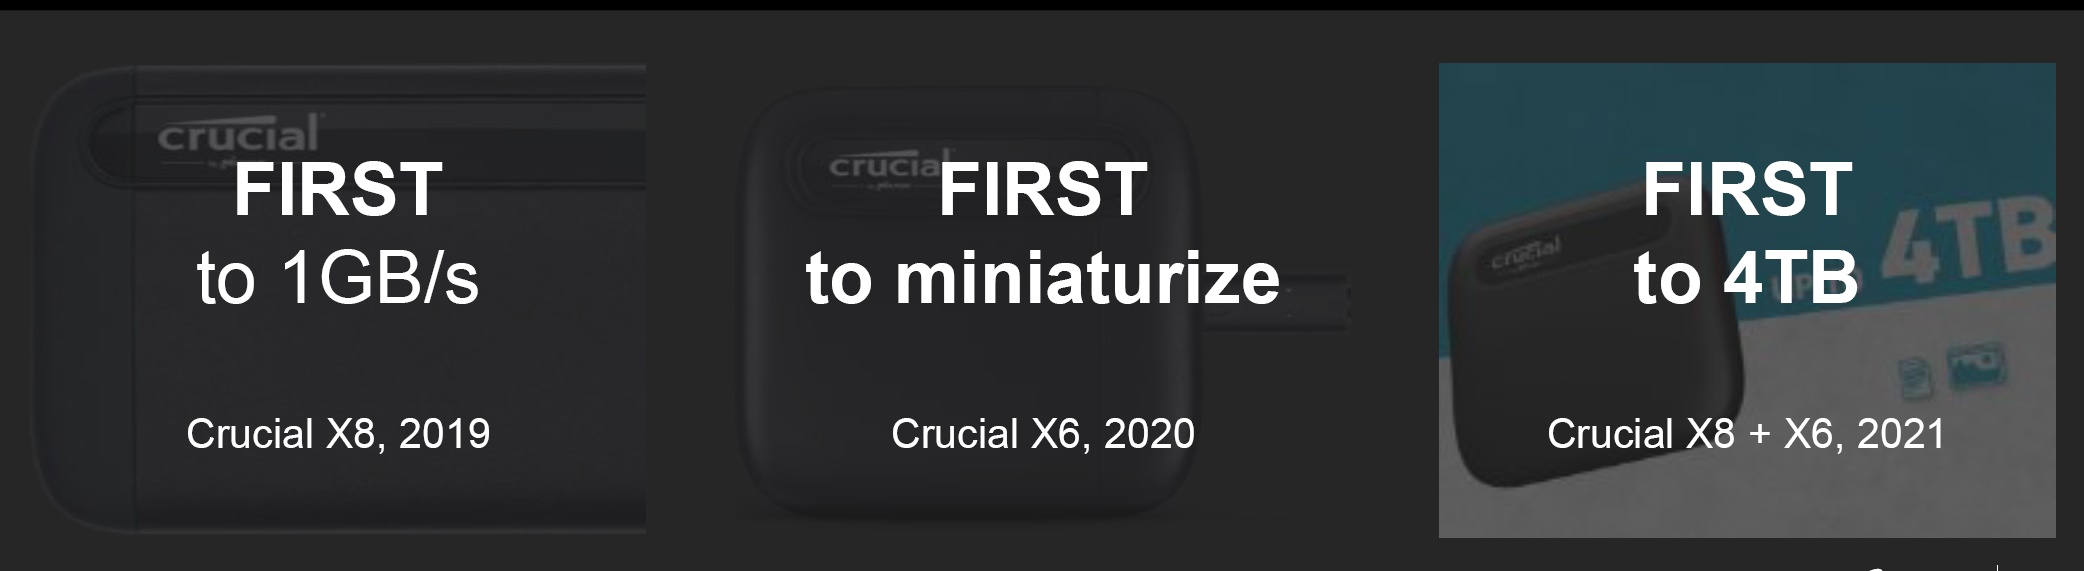 Crucial Launches X9 Pro and X10 Pro Portable SSDs with Speeds up